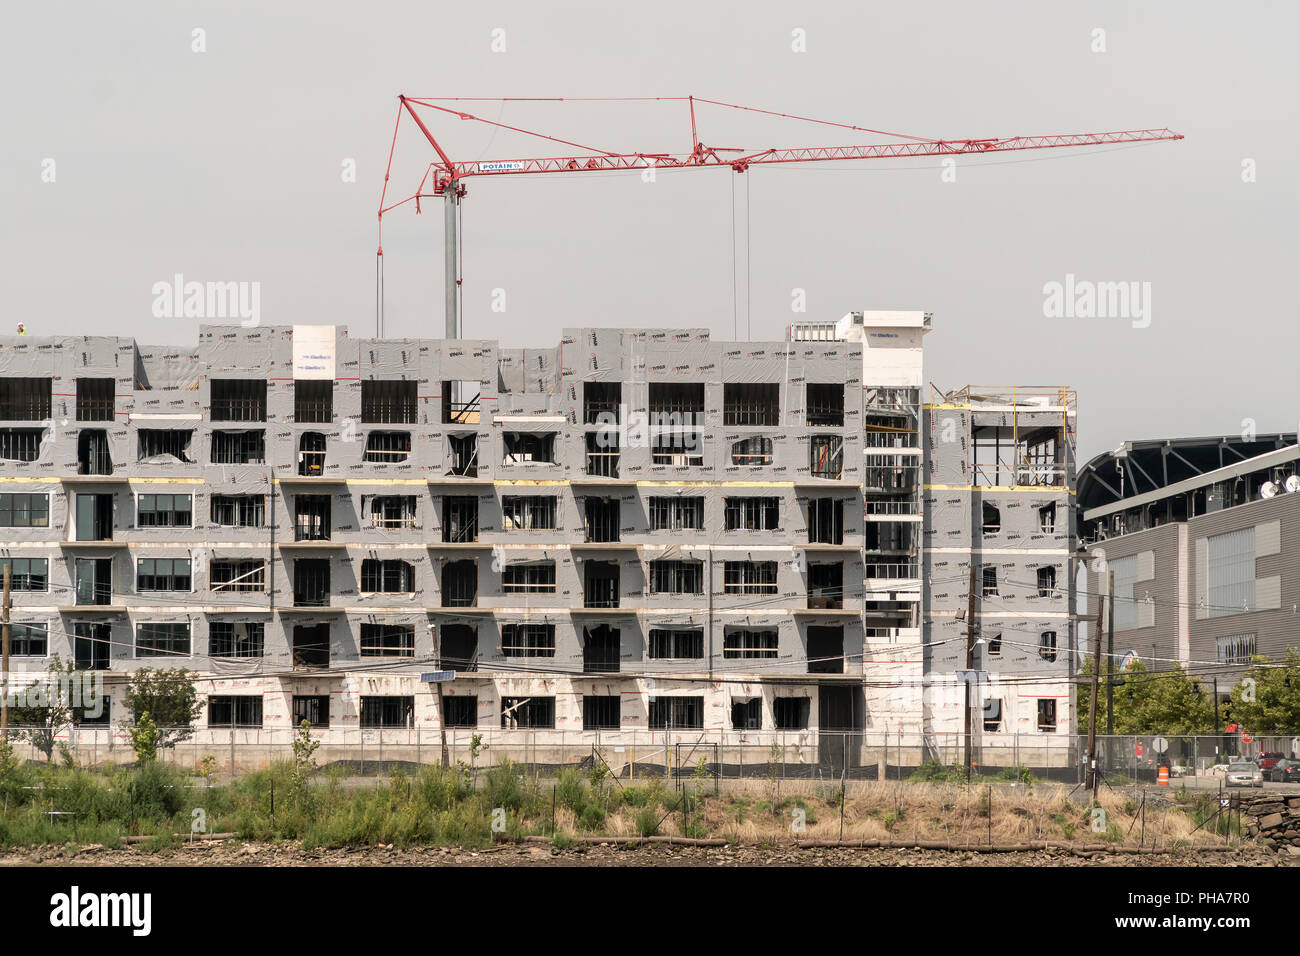 Construction of apartment buildings, in close proximity to the PATH commuter line, along the Passaic River in Harrison, NJ on Saturday, August 25, 2018.  (© Richard B. Levine) Stock Photo